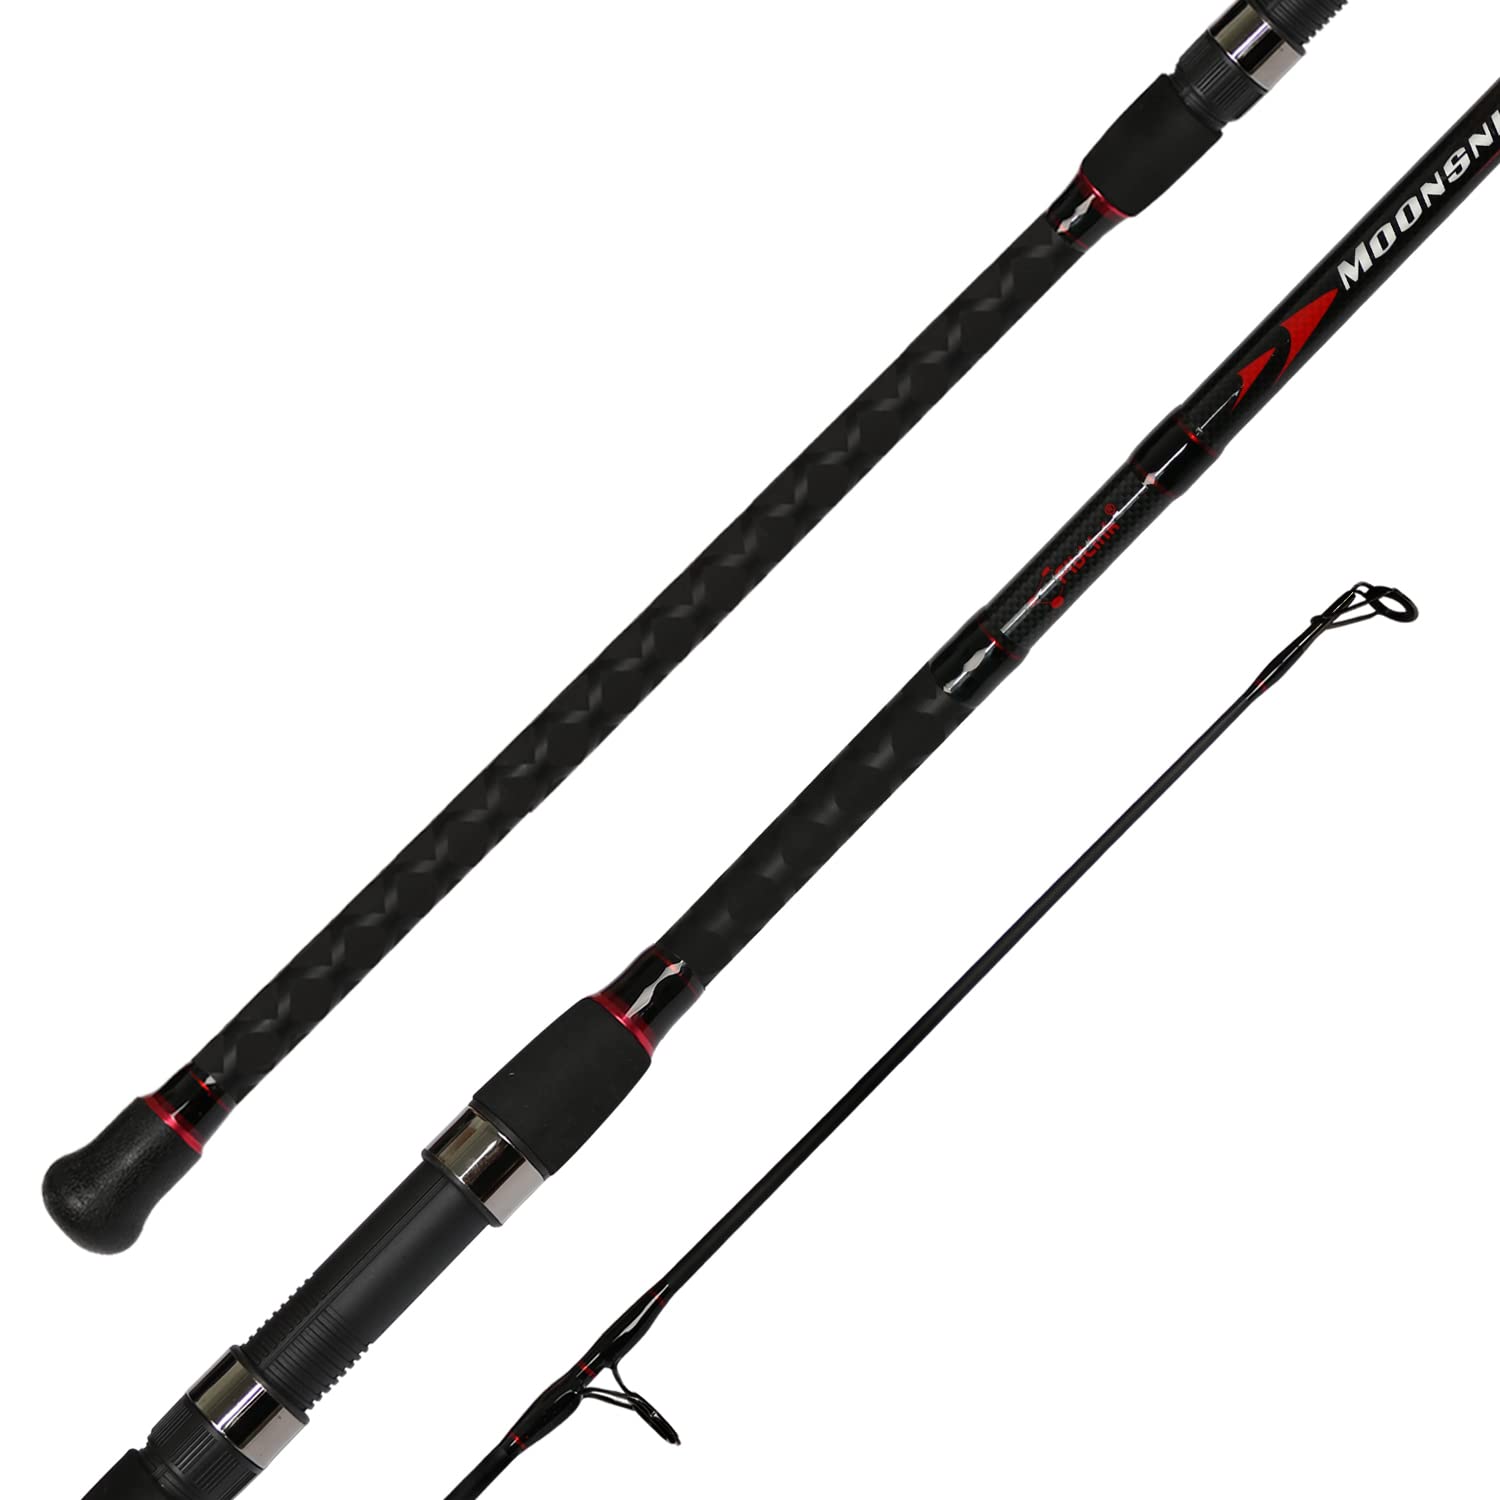 High-Performance Surf Fishing Graphite Spinning Rod - Top Quality